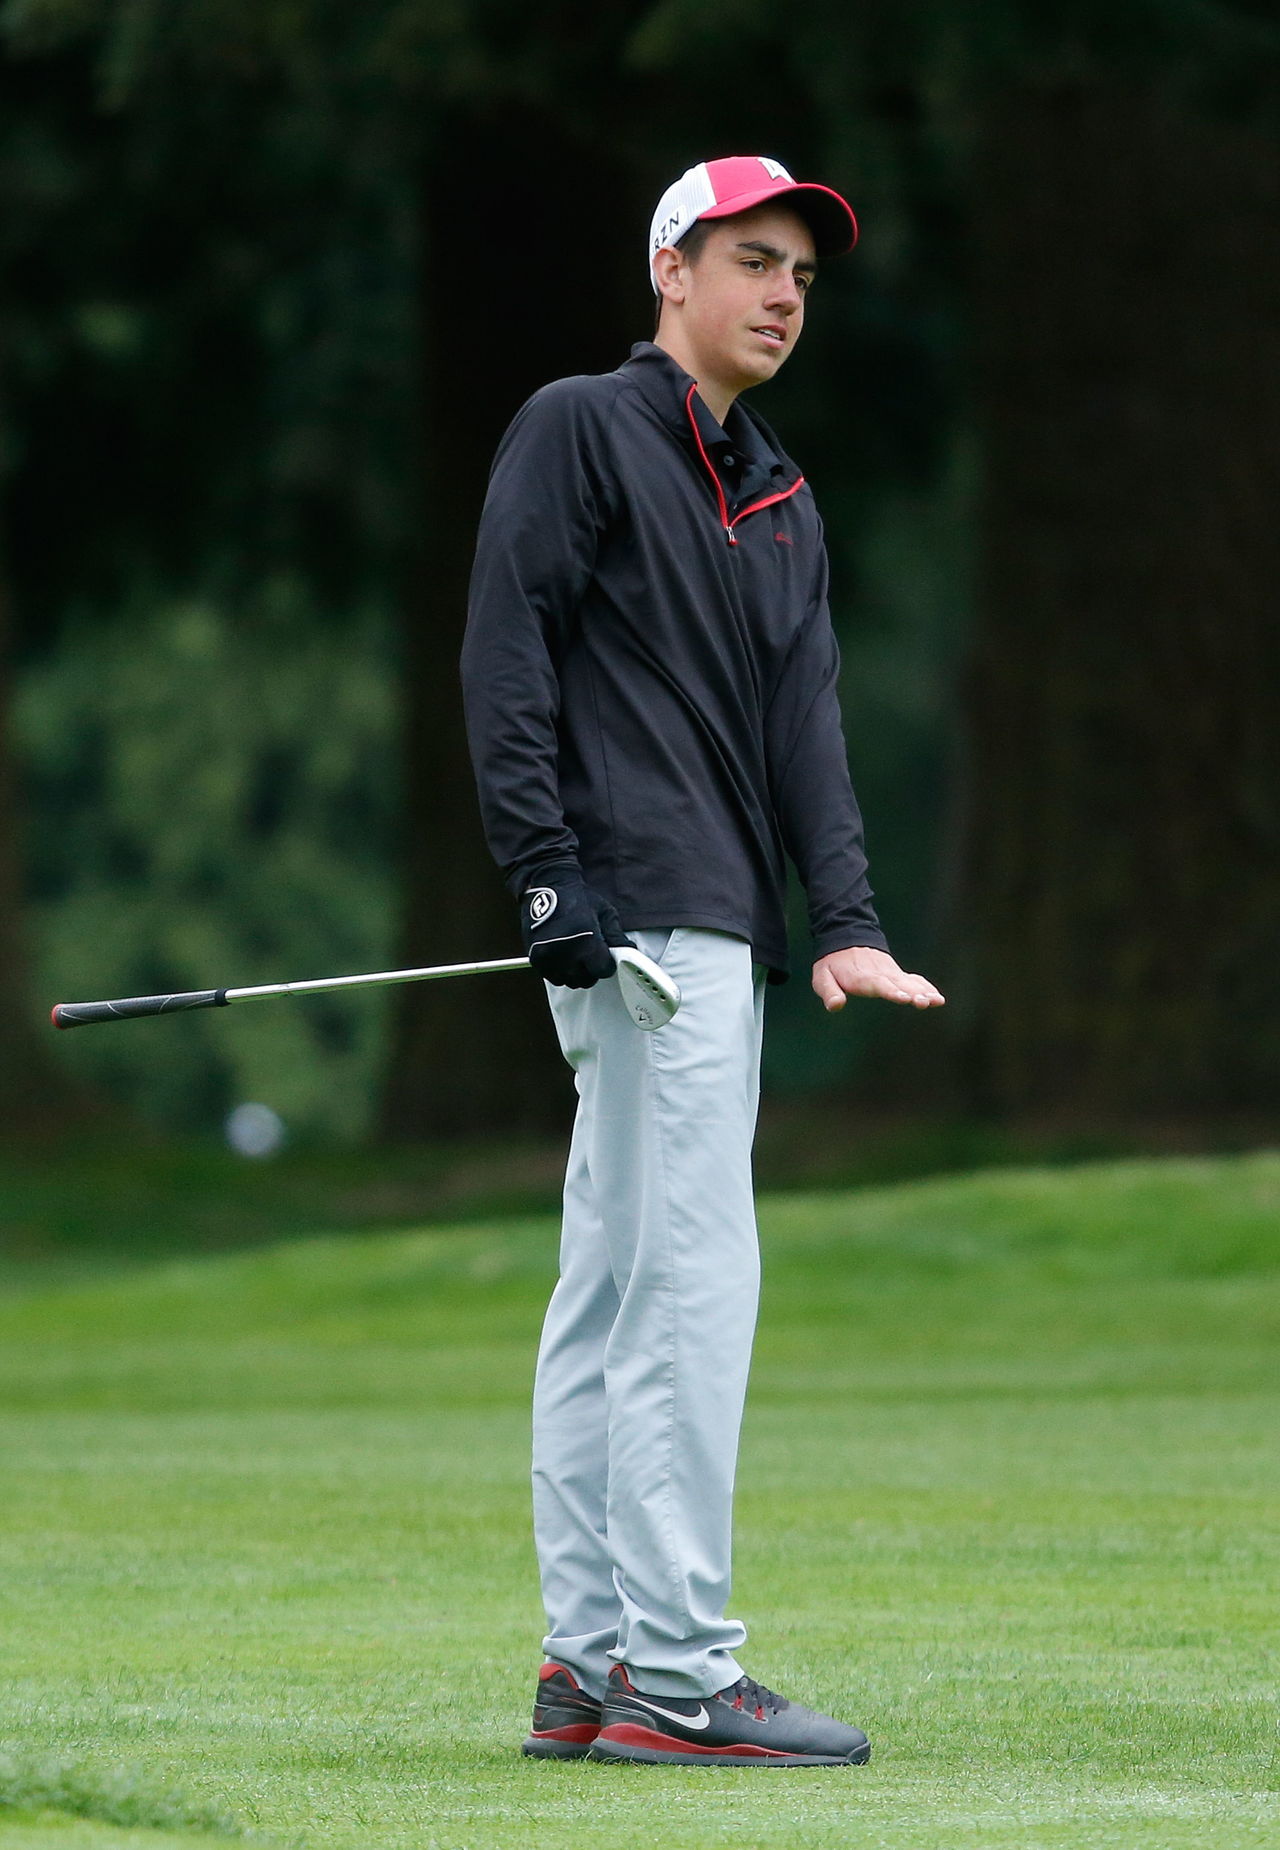 Snohomish’s Ben Gardner motions with his hand as the ball rolls to a stop near the cup during the Tom Dolan Memorial Invitational at the Everett Golf & Country Club on Monday. Gardner finished in a four-way tied for fourth with a 74.